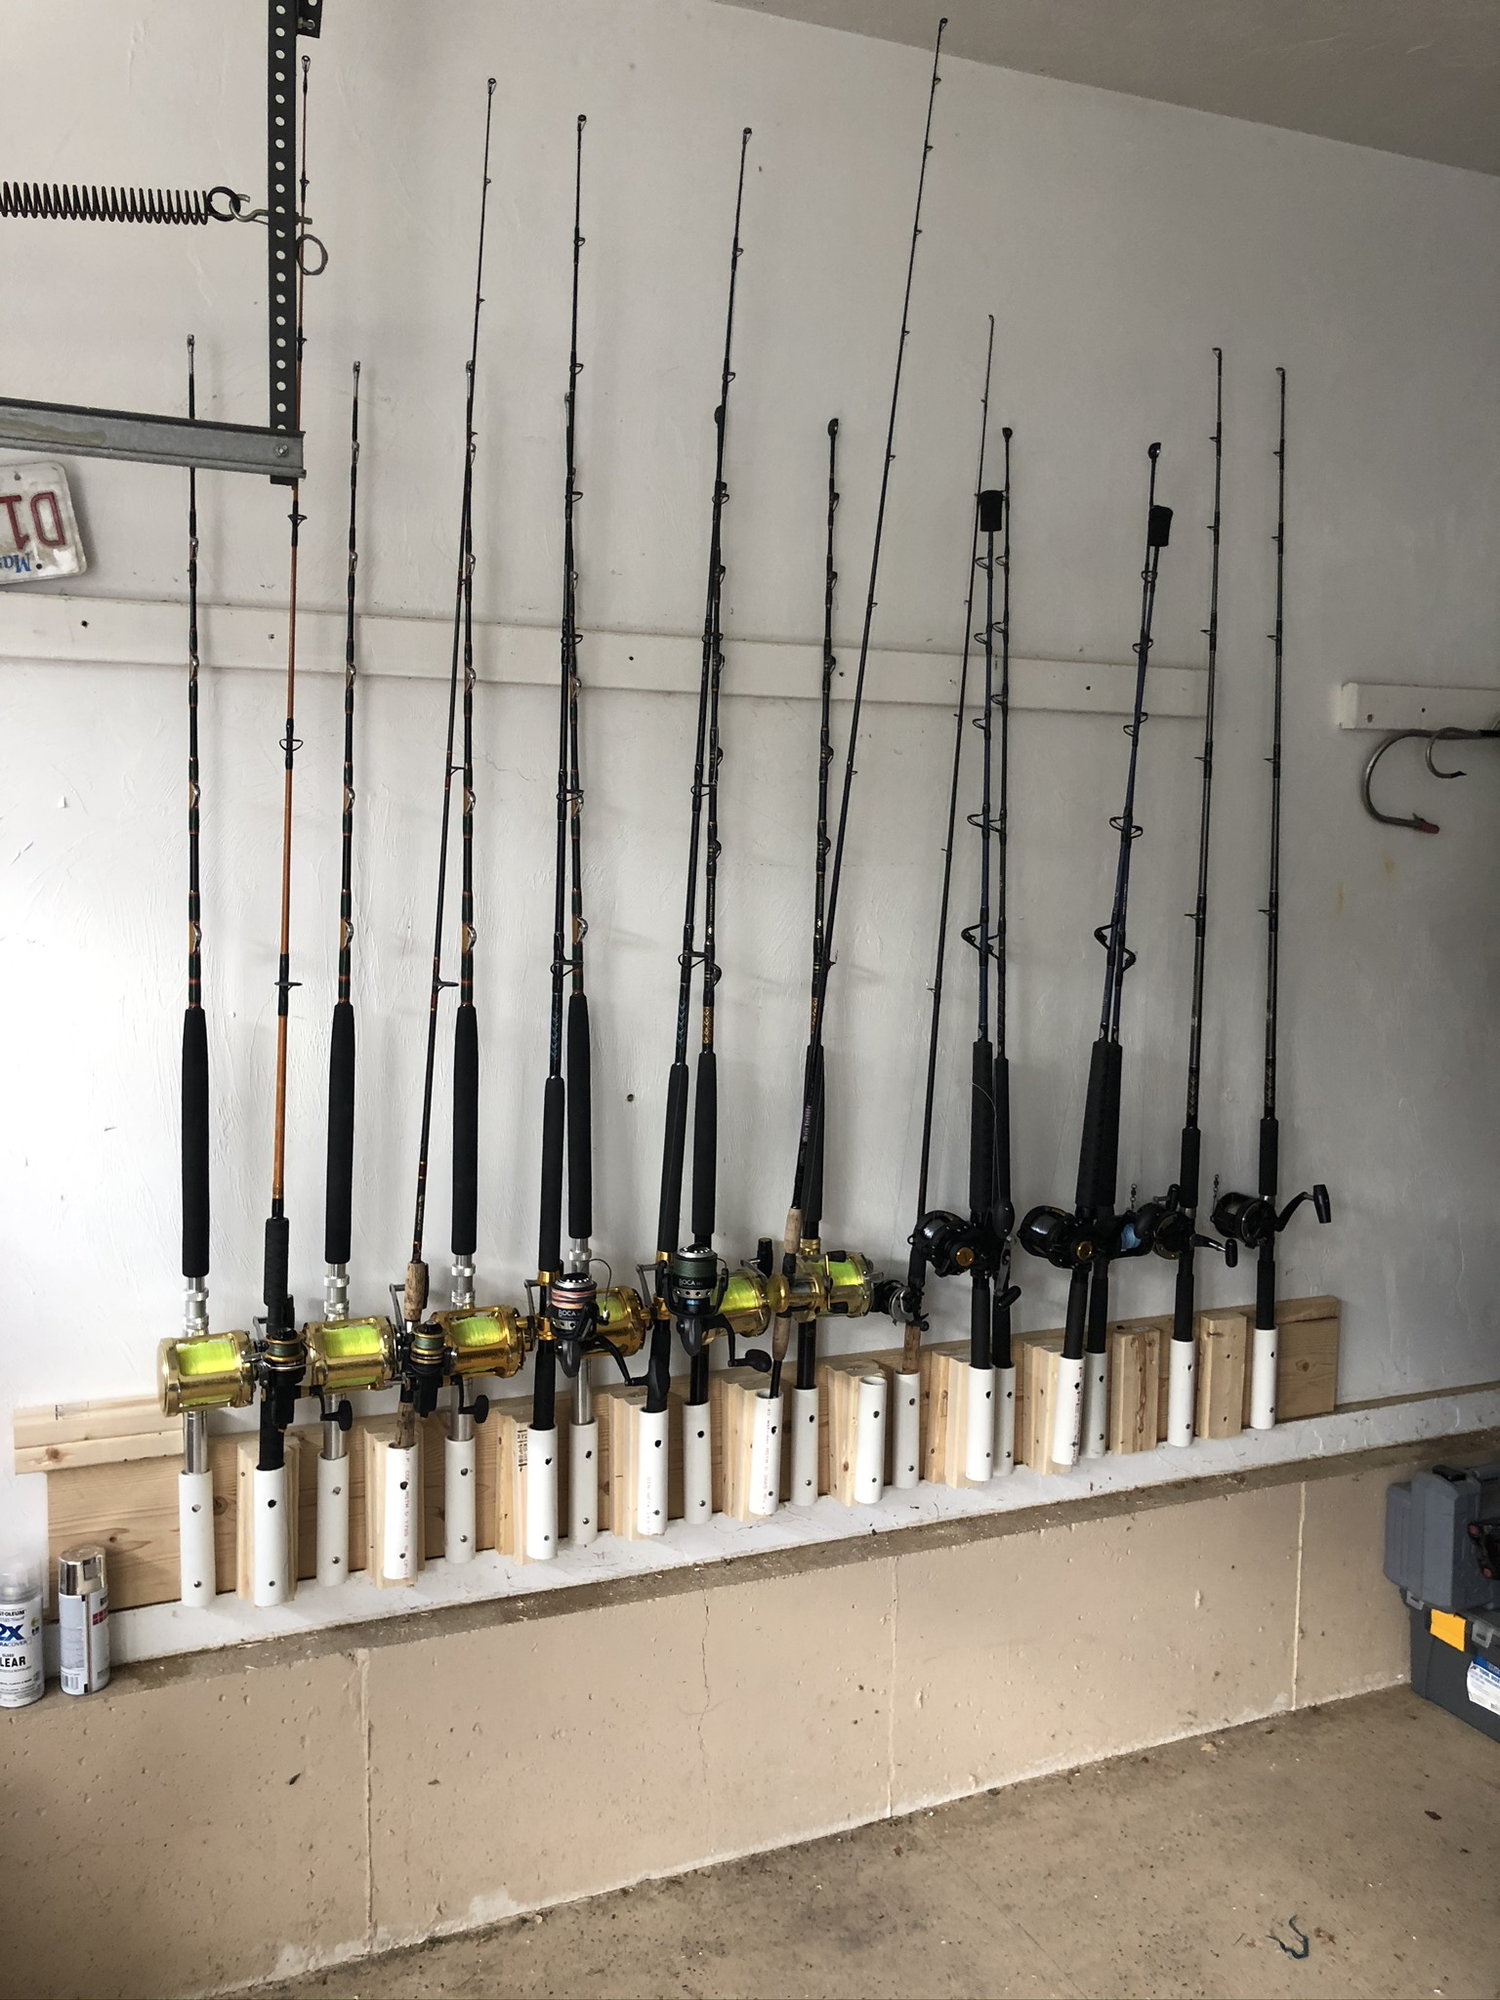 Show me your rod storage ideas!! - The Hull Truth - Boating and